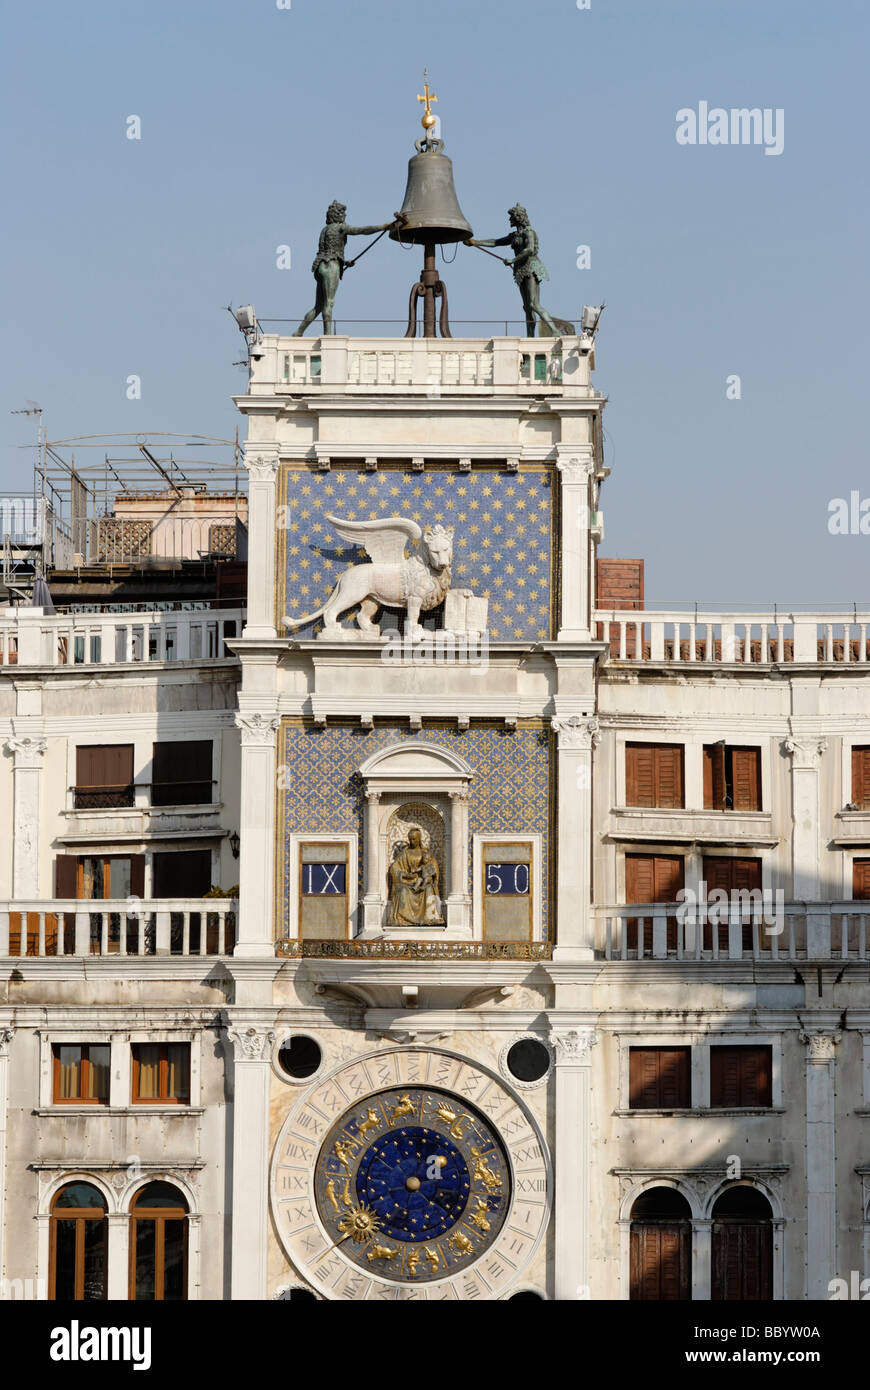 The bell tower Torre dell Orologio on the Piazza San Marco, Venice, Venezia, Italy, Europe Stock Photo